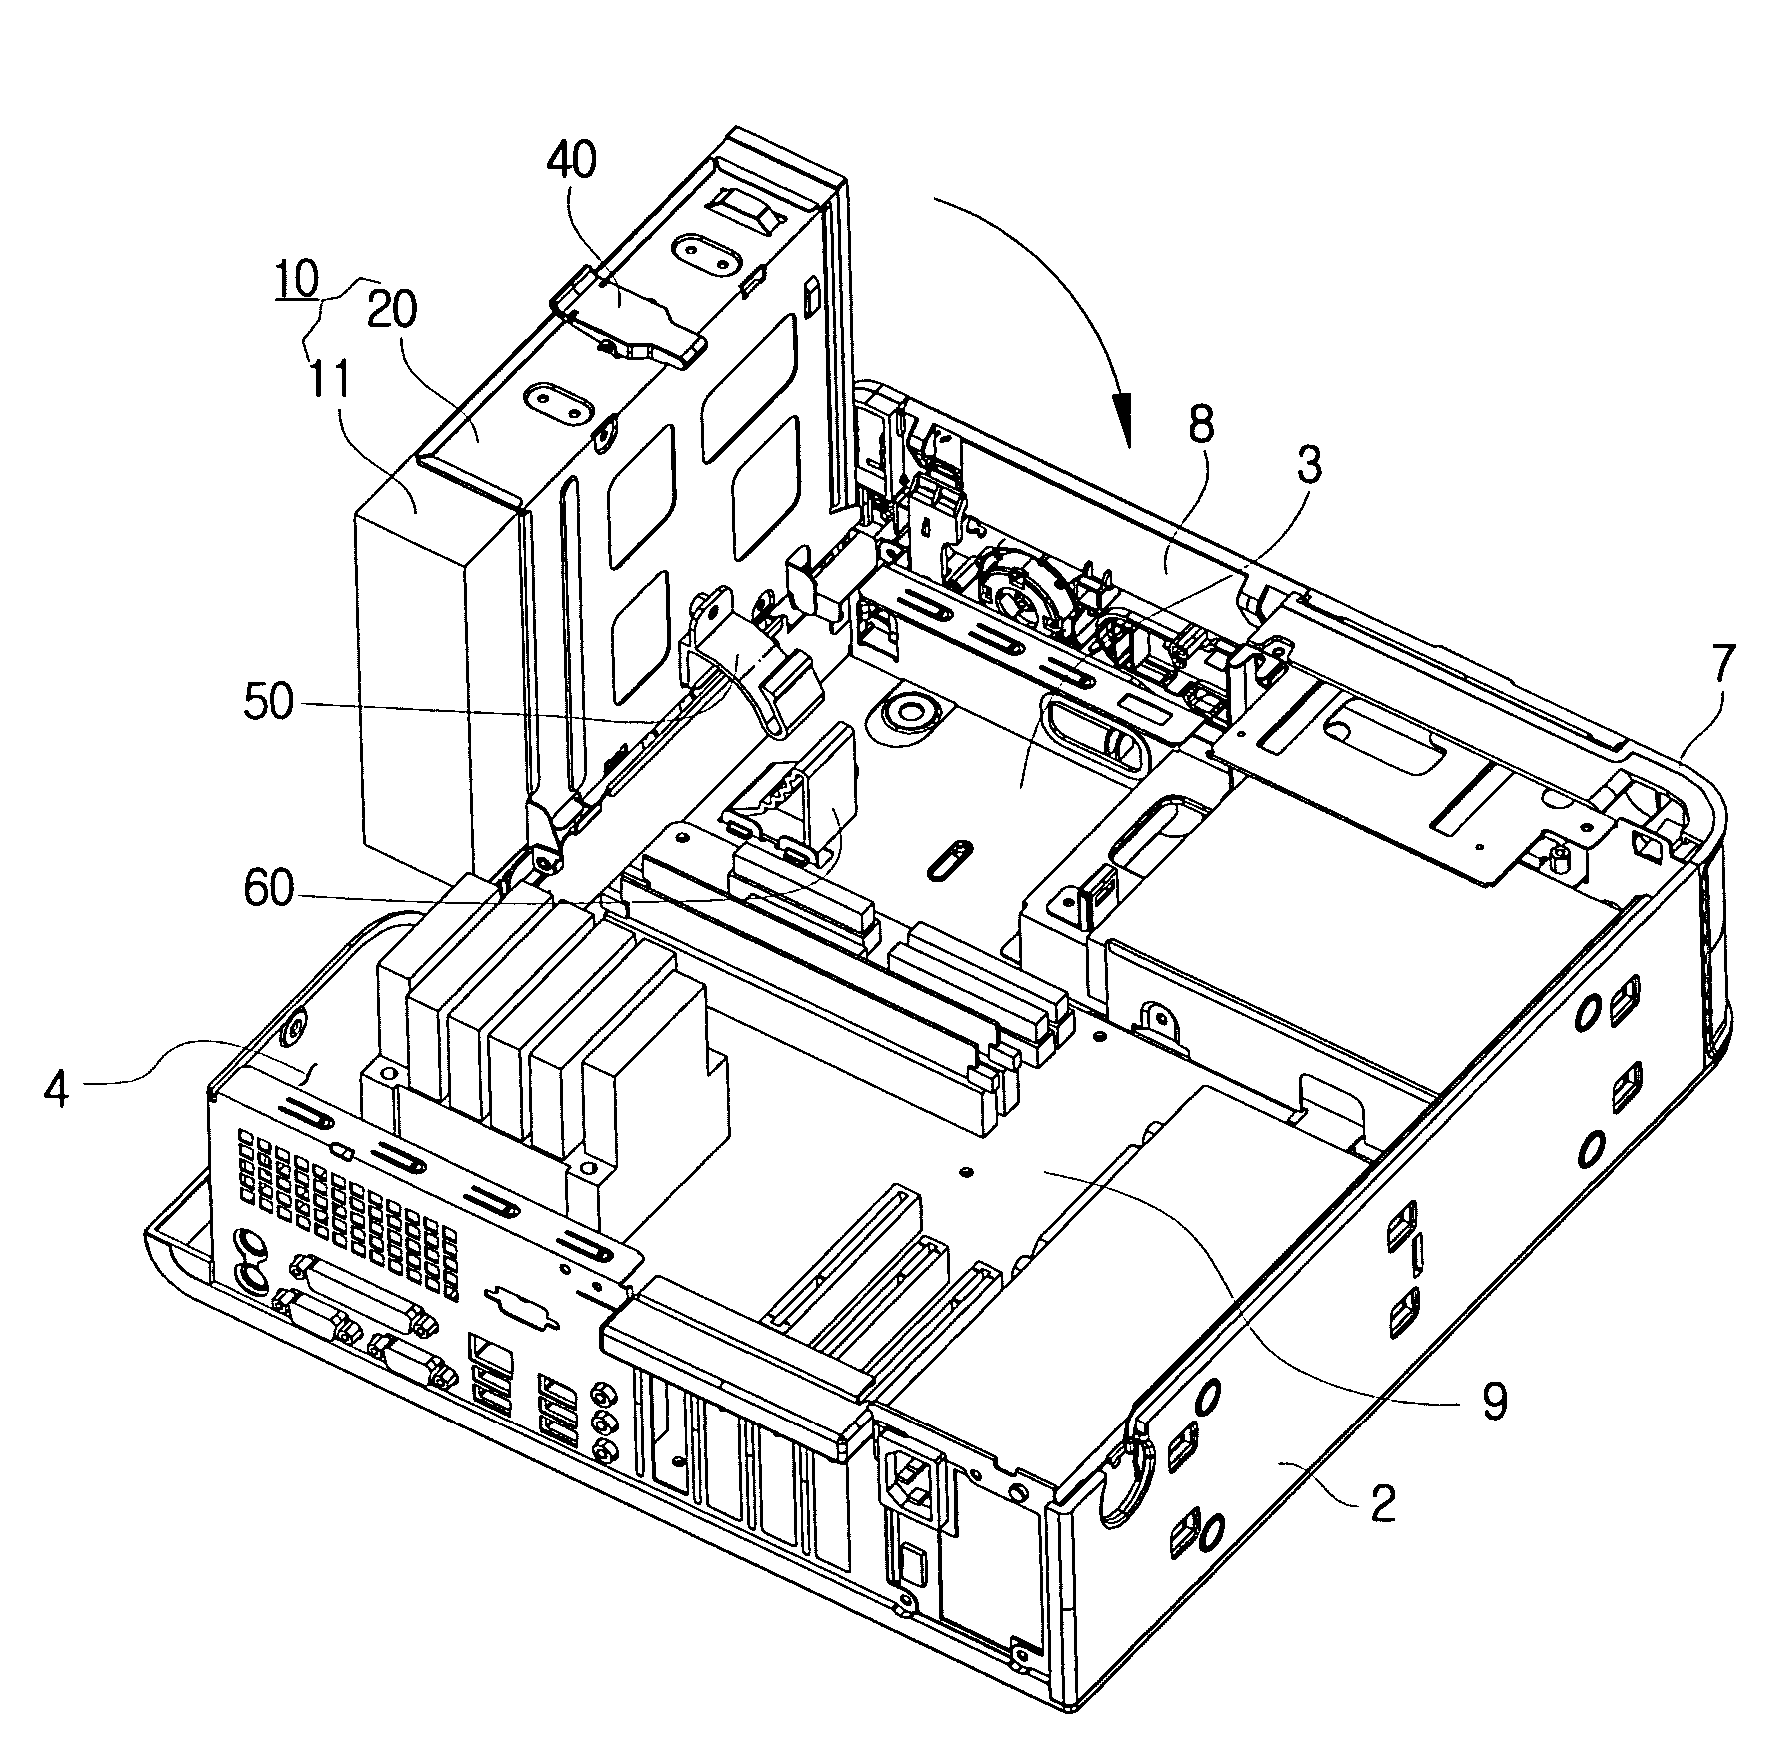 Optical disk drive assembly that is rotatable with respect to a computer casing